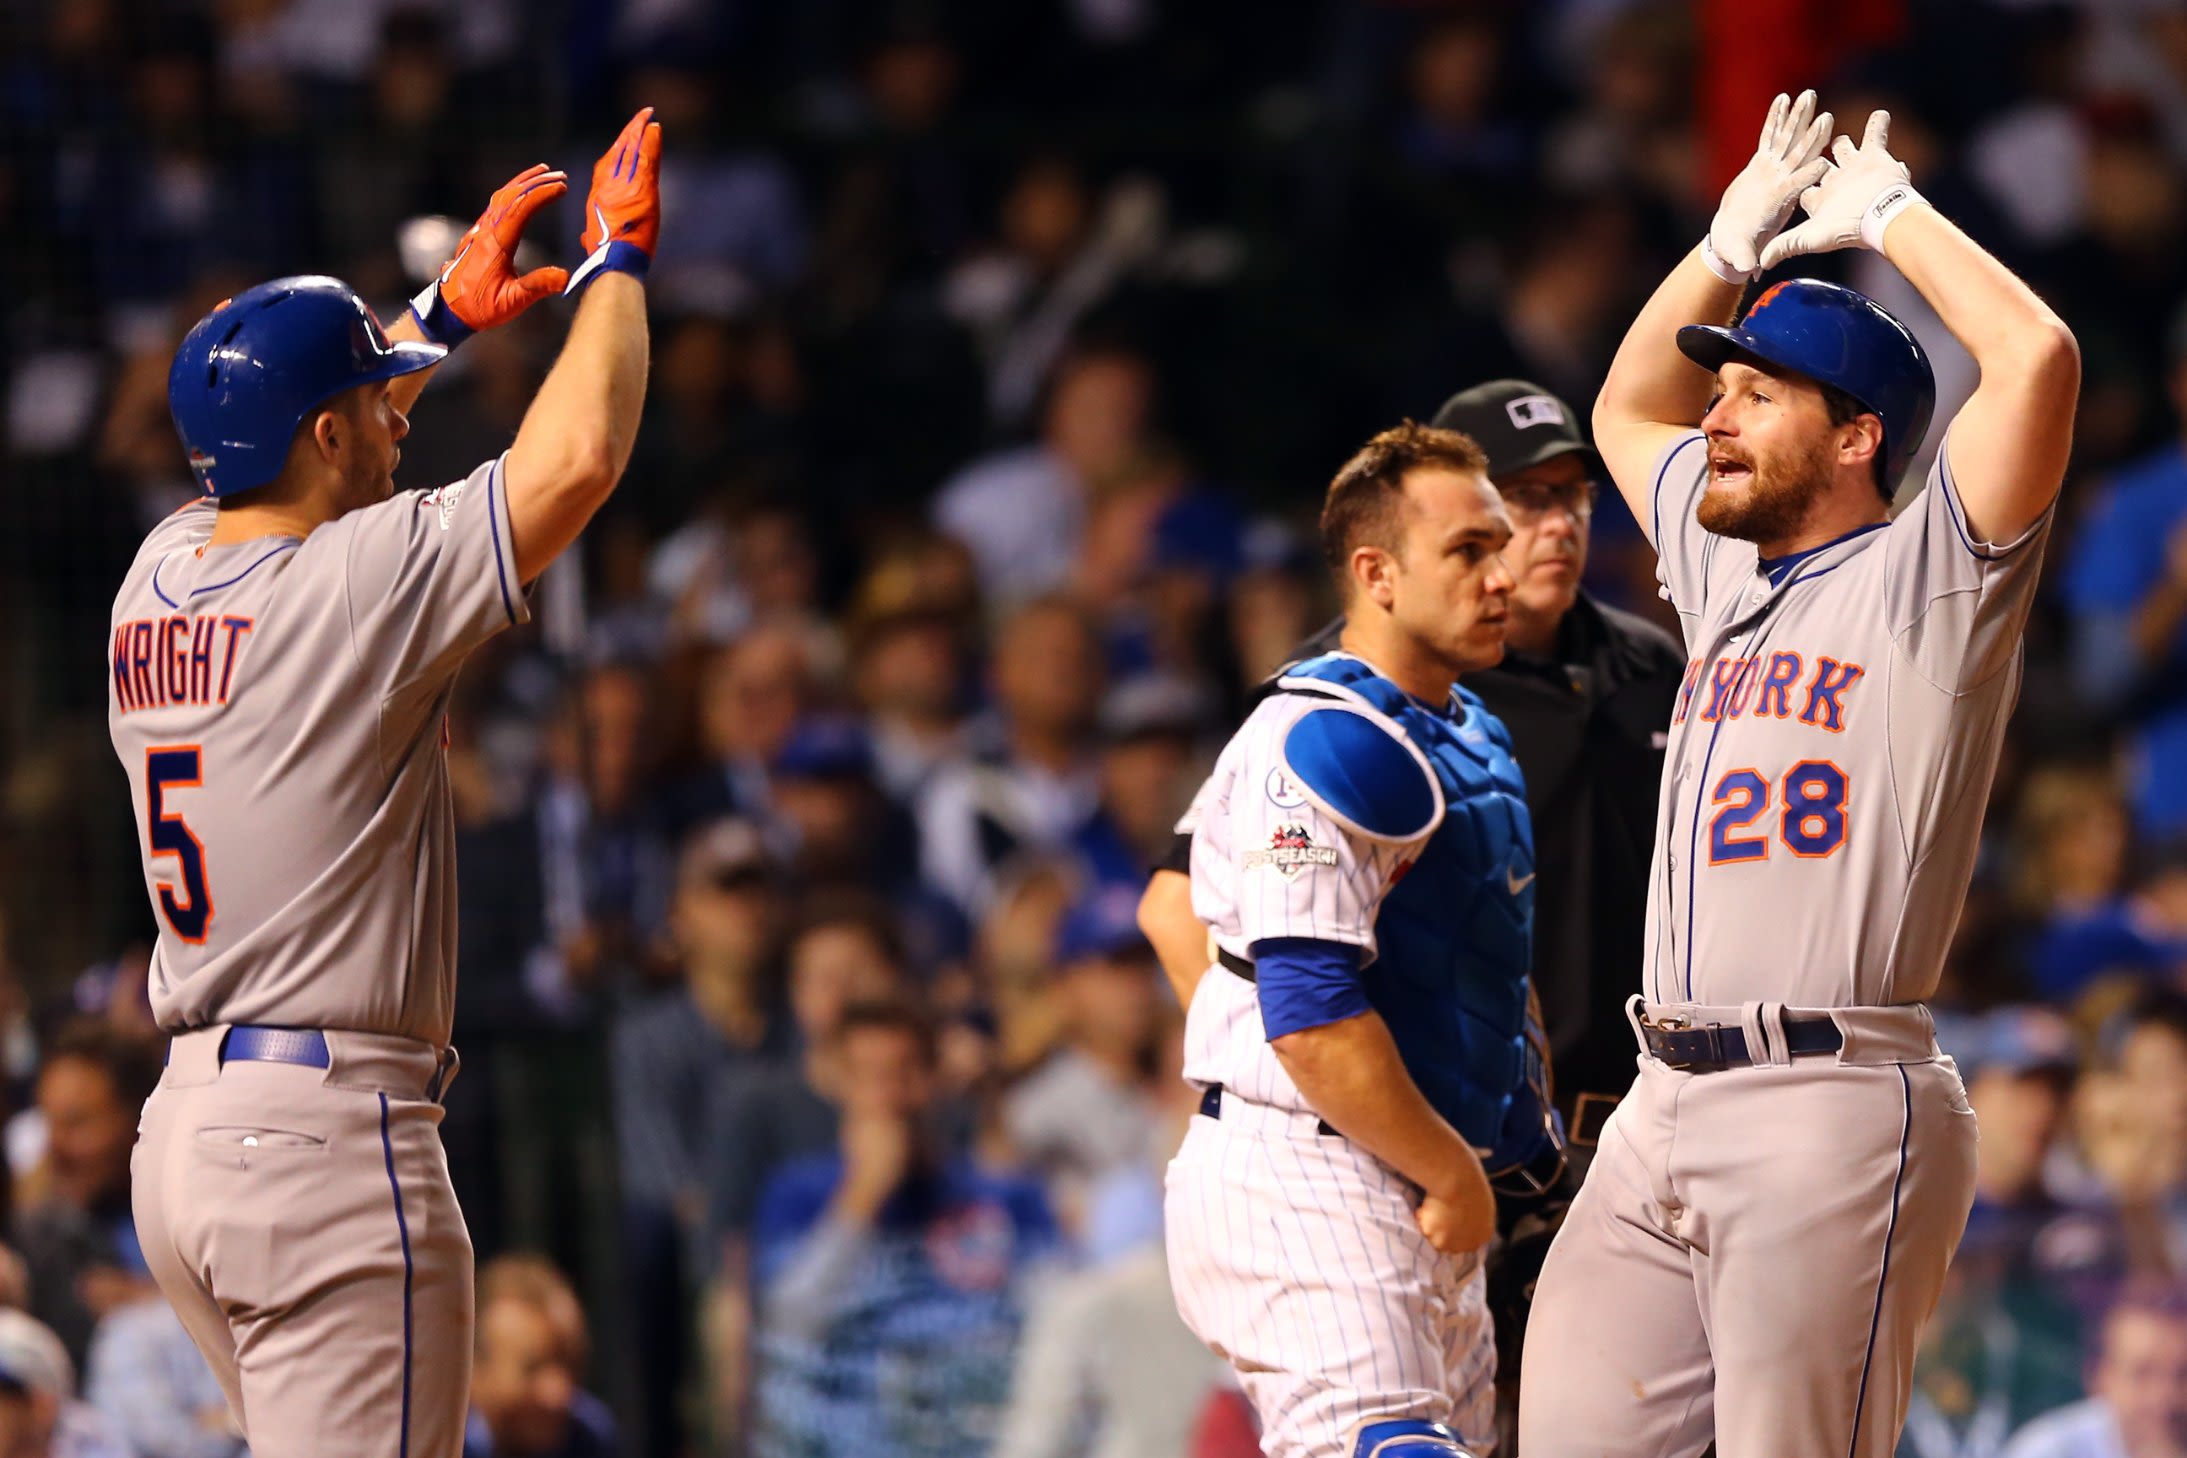 Daniel Murphy and the New York Mets sweep Chicago Cubs to reach World Series